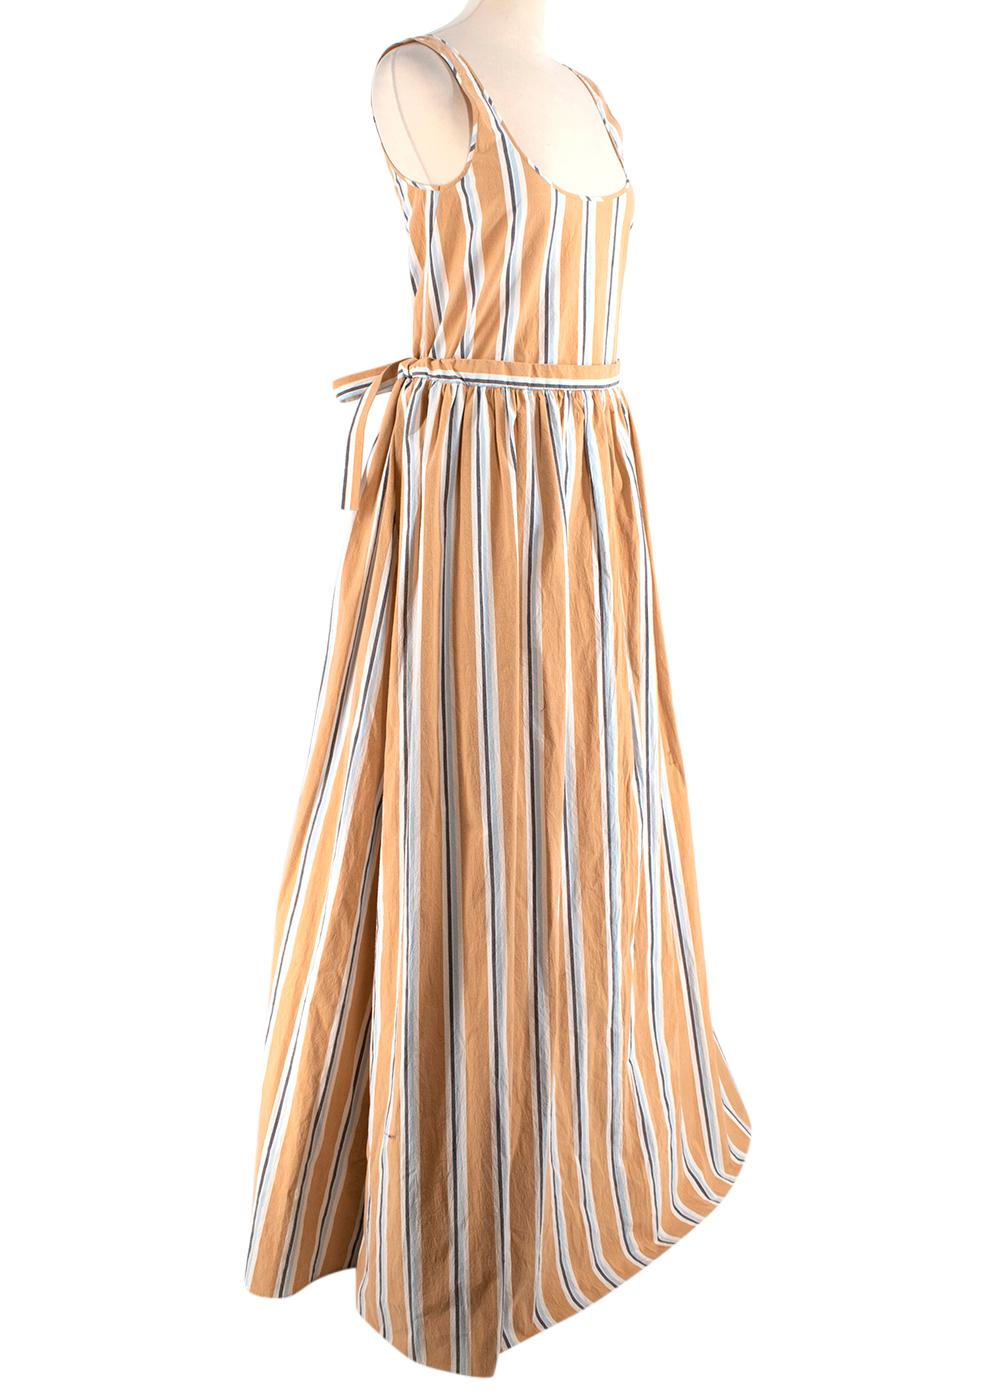 Brock Collection Oriana Striped Cotton Beige Maxi Dress

- Relaxed fit throughout the body with a coordinating waist tie
- Falls into a long skirt
- Sleeveless with scoop neckline
- Striped with graphic hues of white, black and blue

Materials:
100%